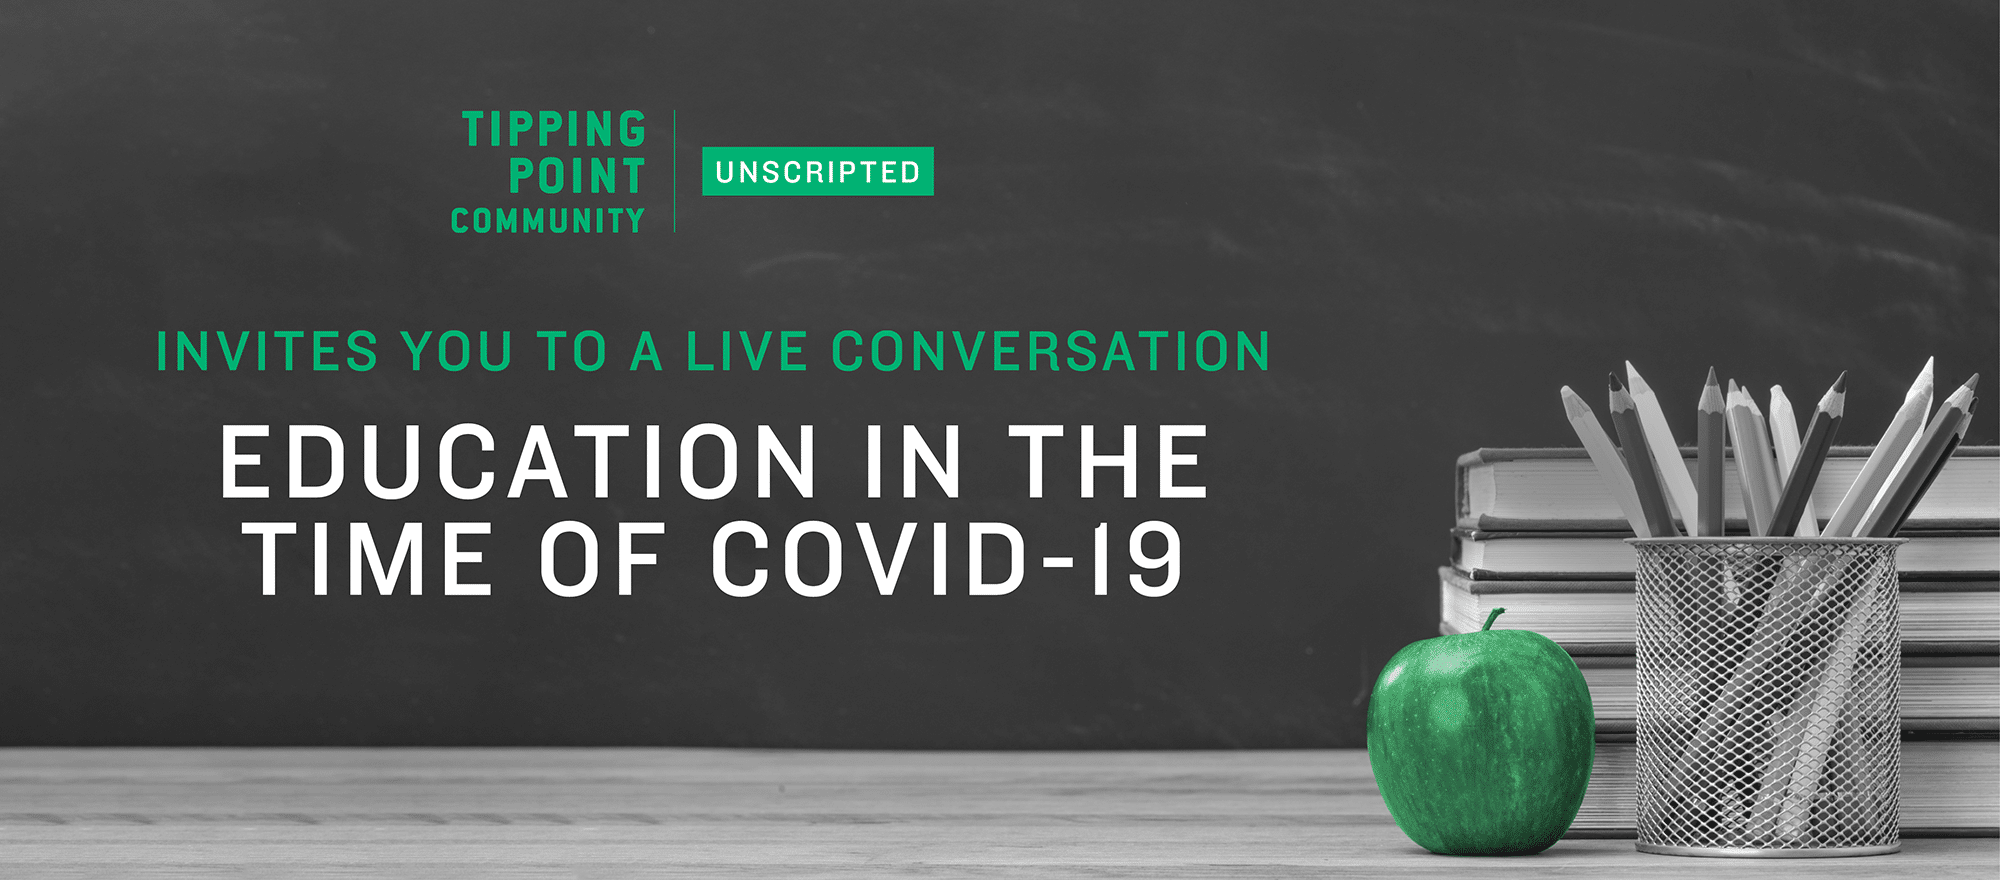 Tipping Point Invite to Live Conversation about education during Covid